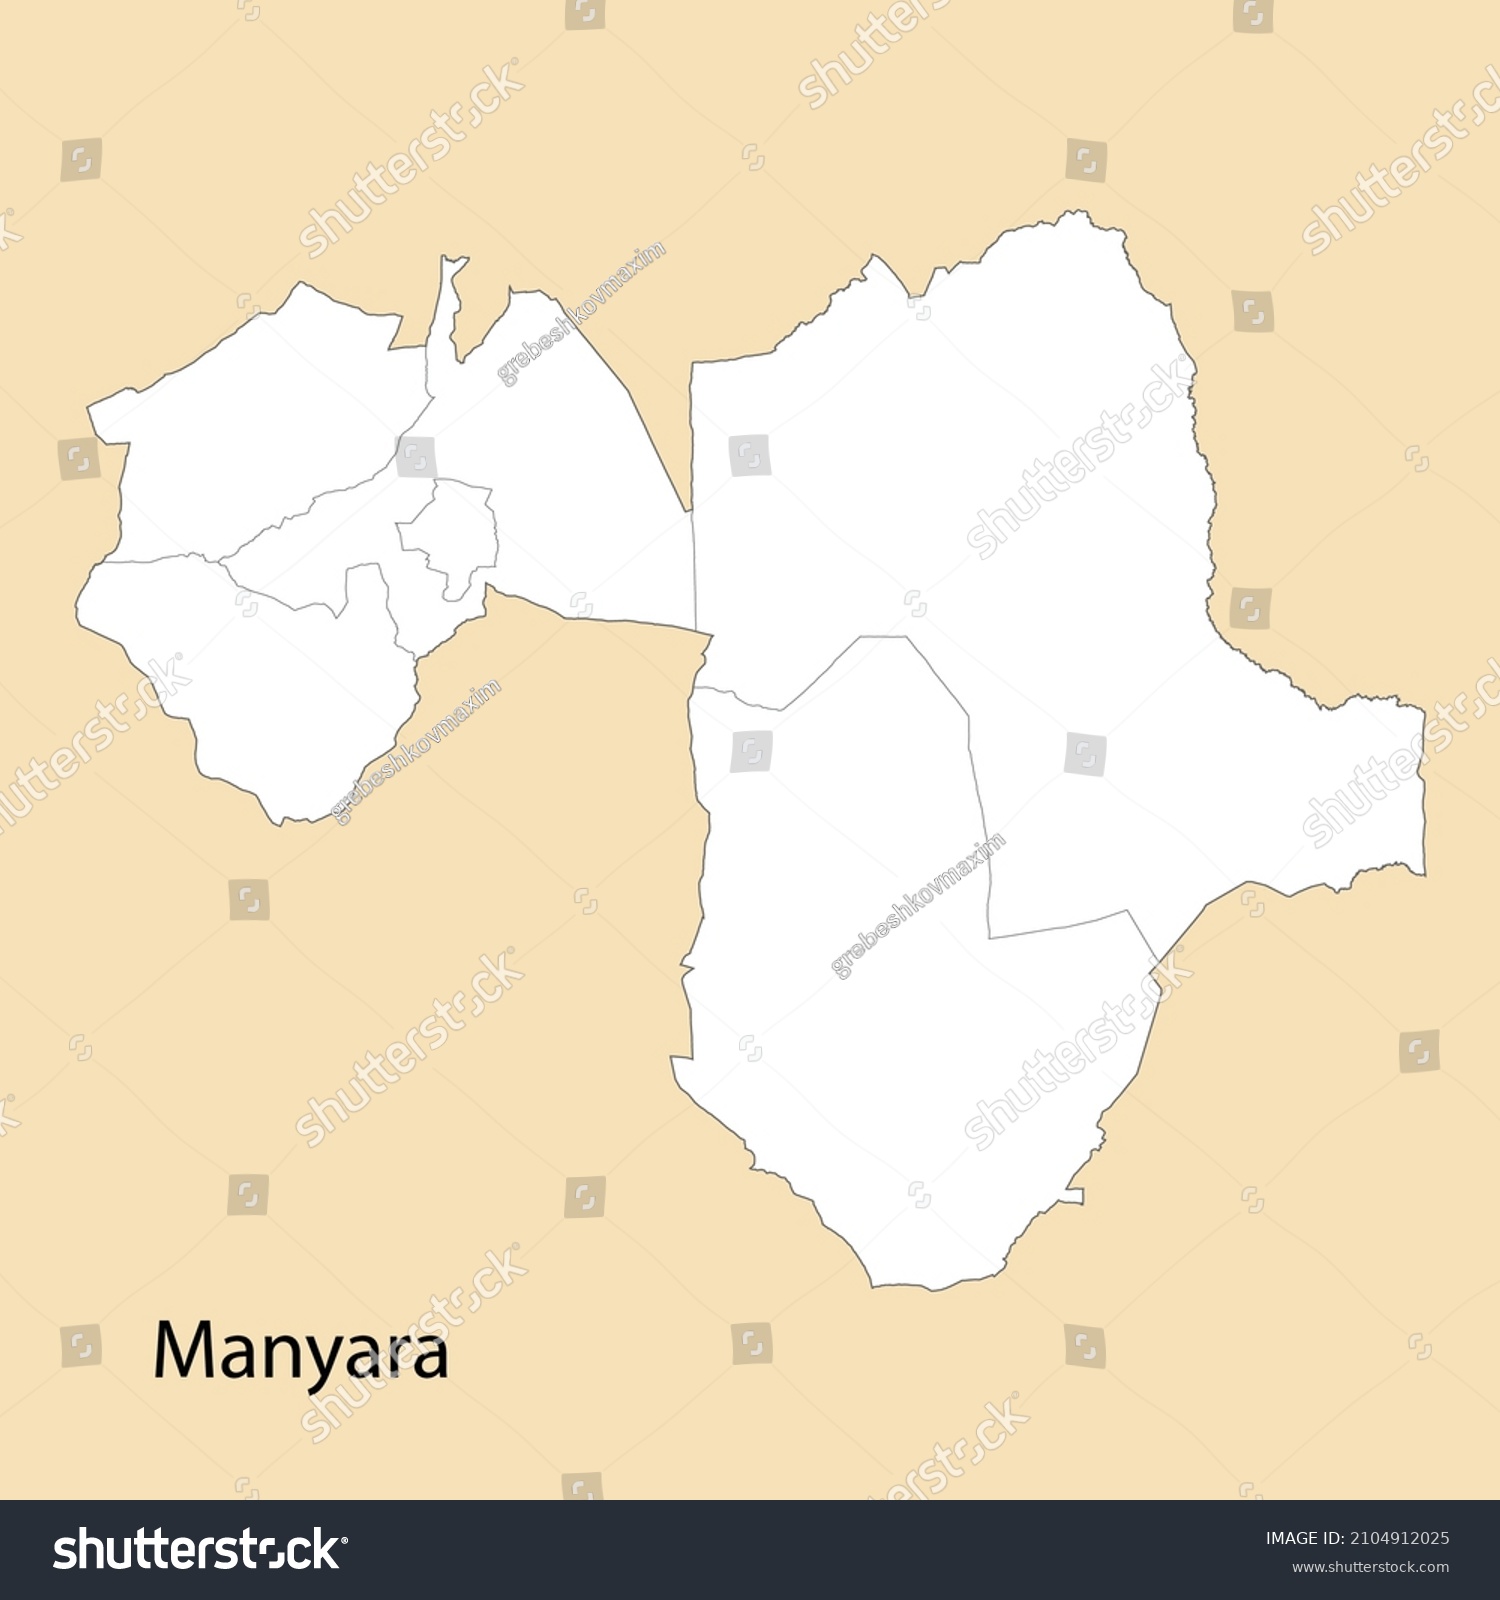 Stock Vector High Quality Map Of Manyara Is A Region Of Tanzania With Borders Of The Districts 2104912025 